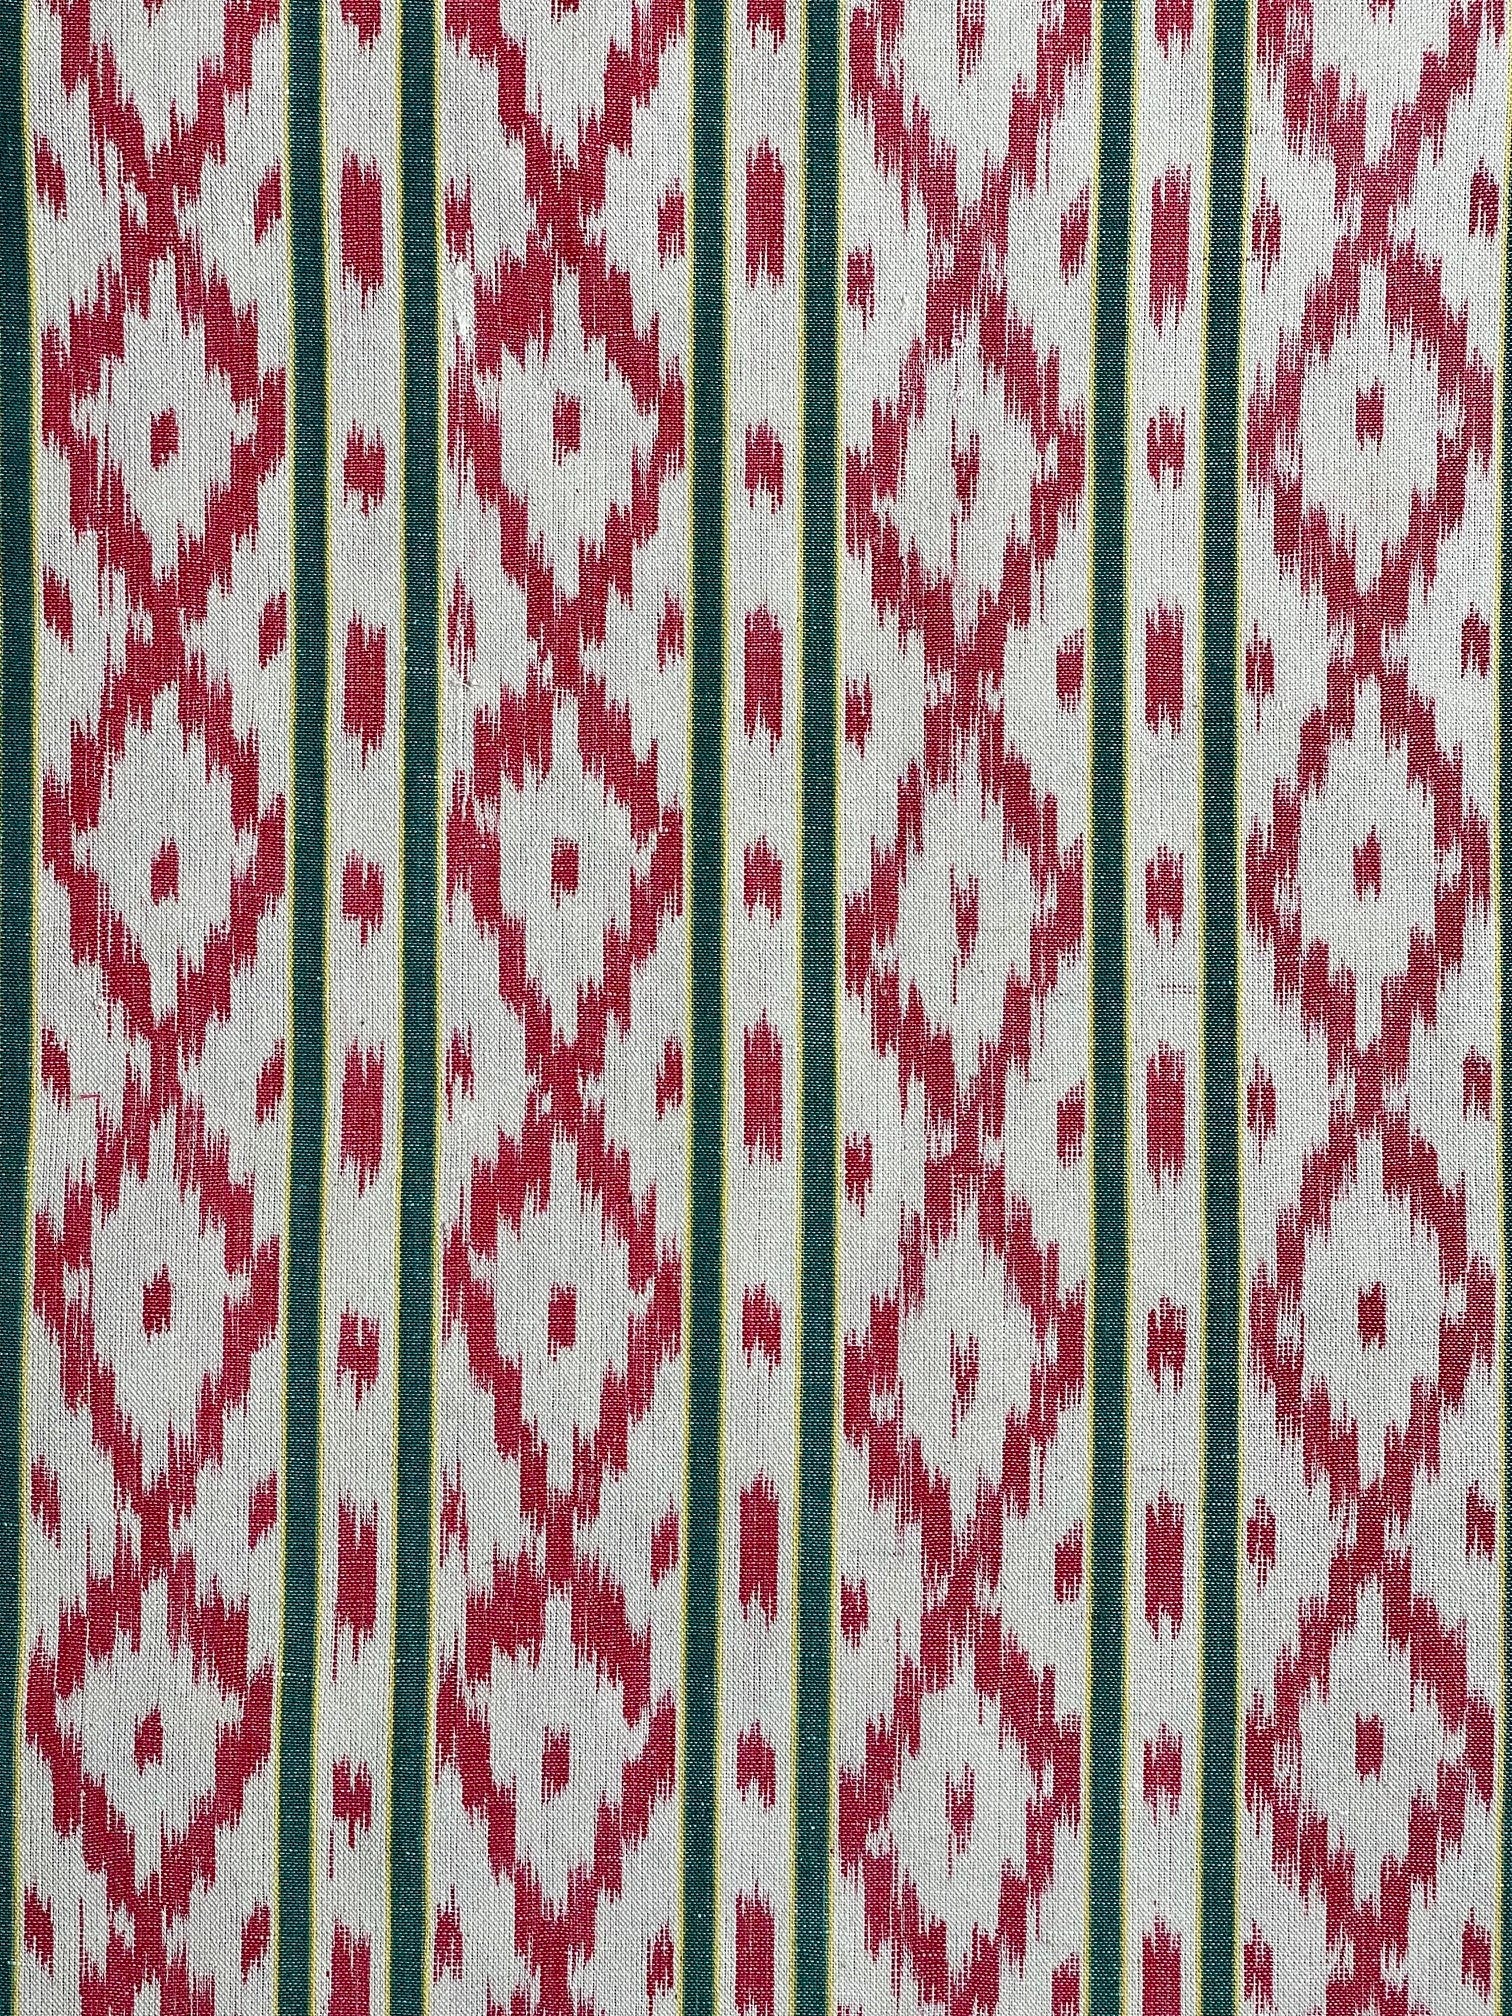 BUJOSA FABRIC - GREEN & YELLOW STRIPES WITH RED CHEVRON